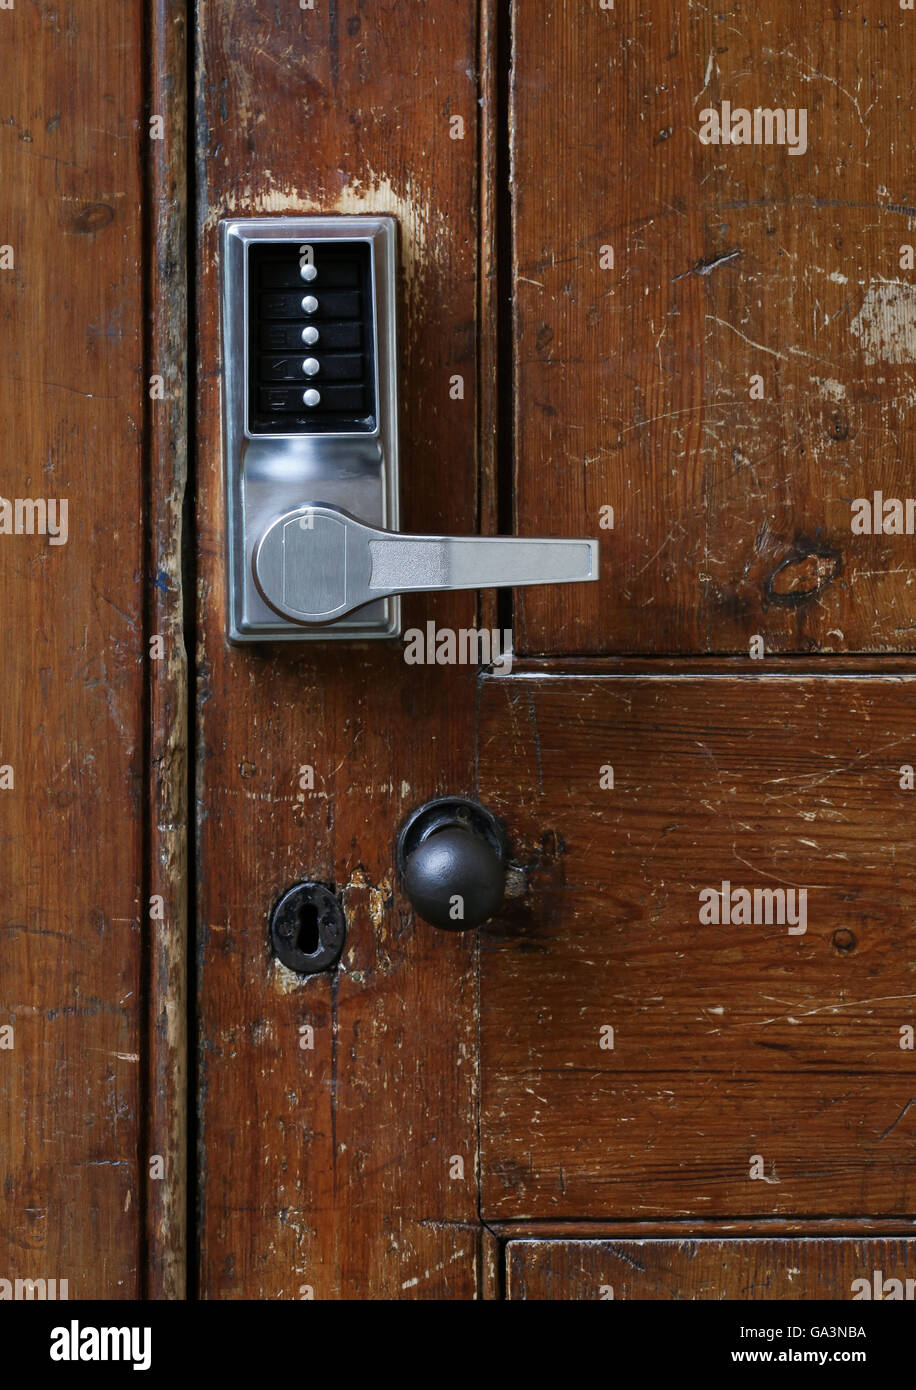 Simple door handle electronic lock with numeric buttons on old wooden ...